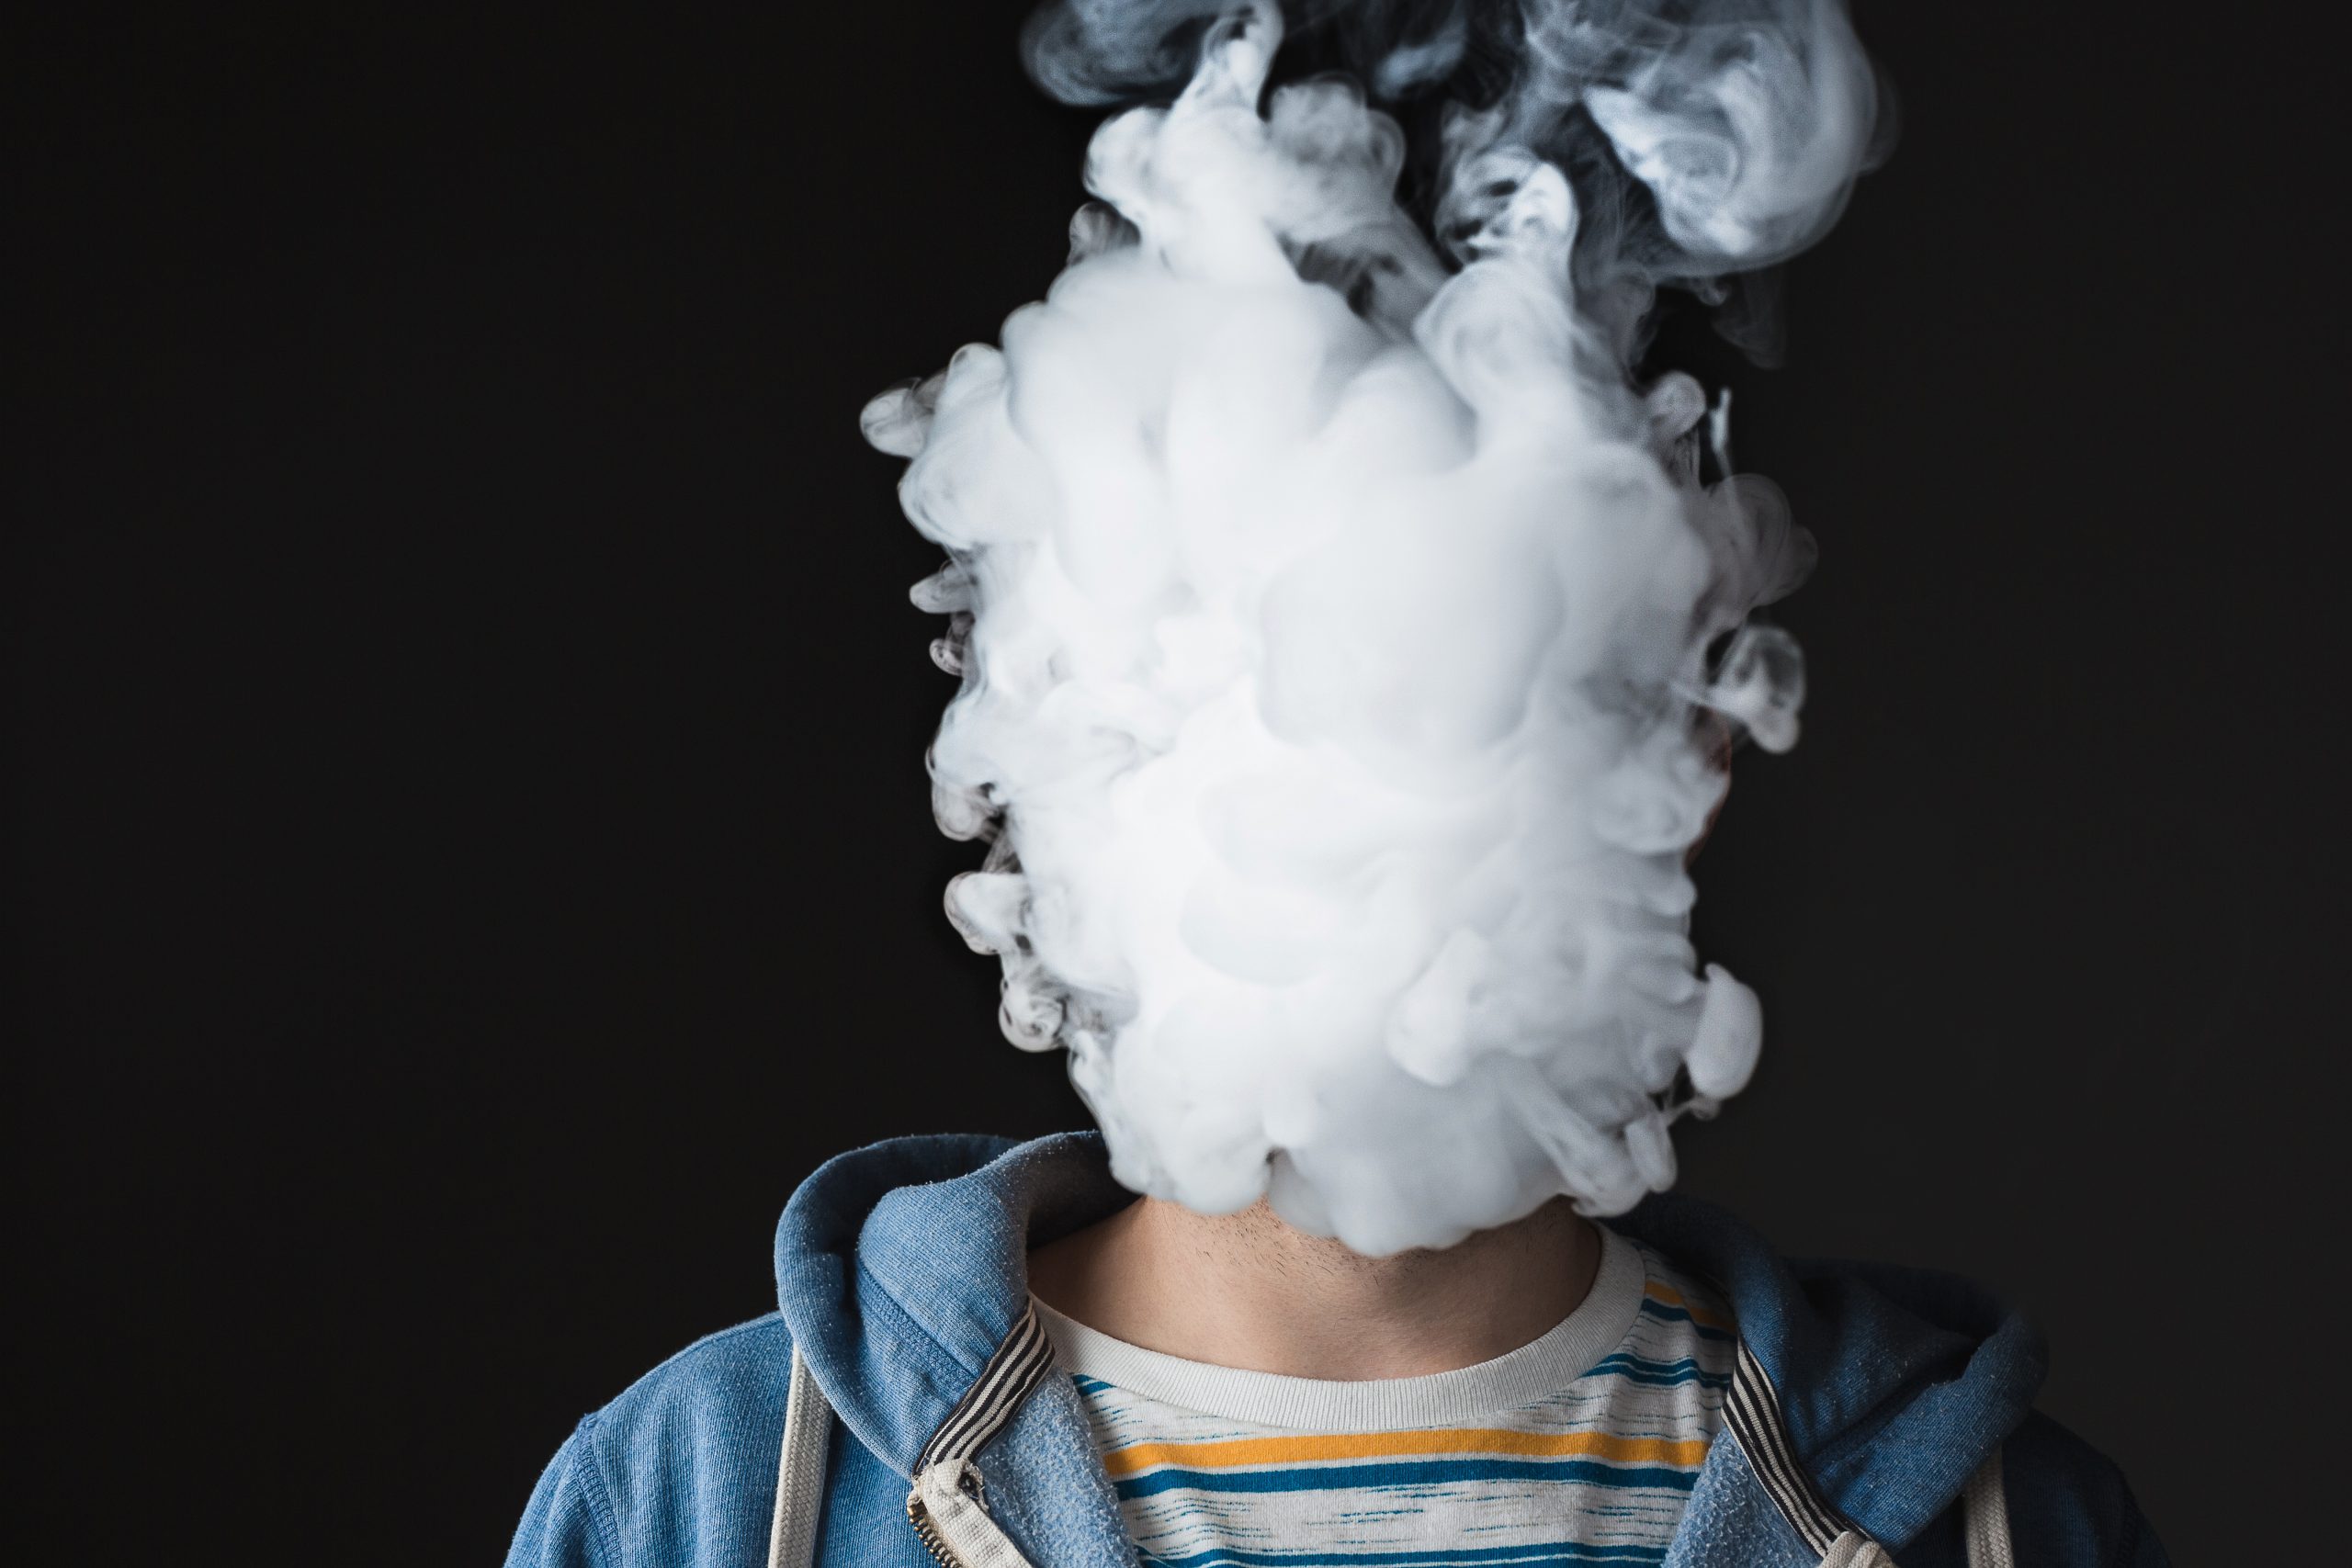 Underage vaping is on the rise: here’s how young New Zealanders are finding it so easy to access